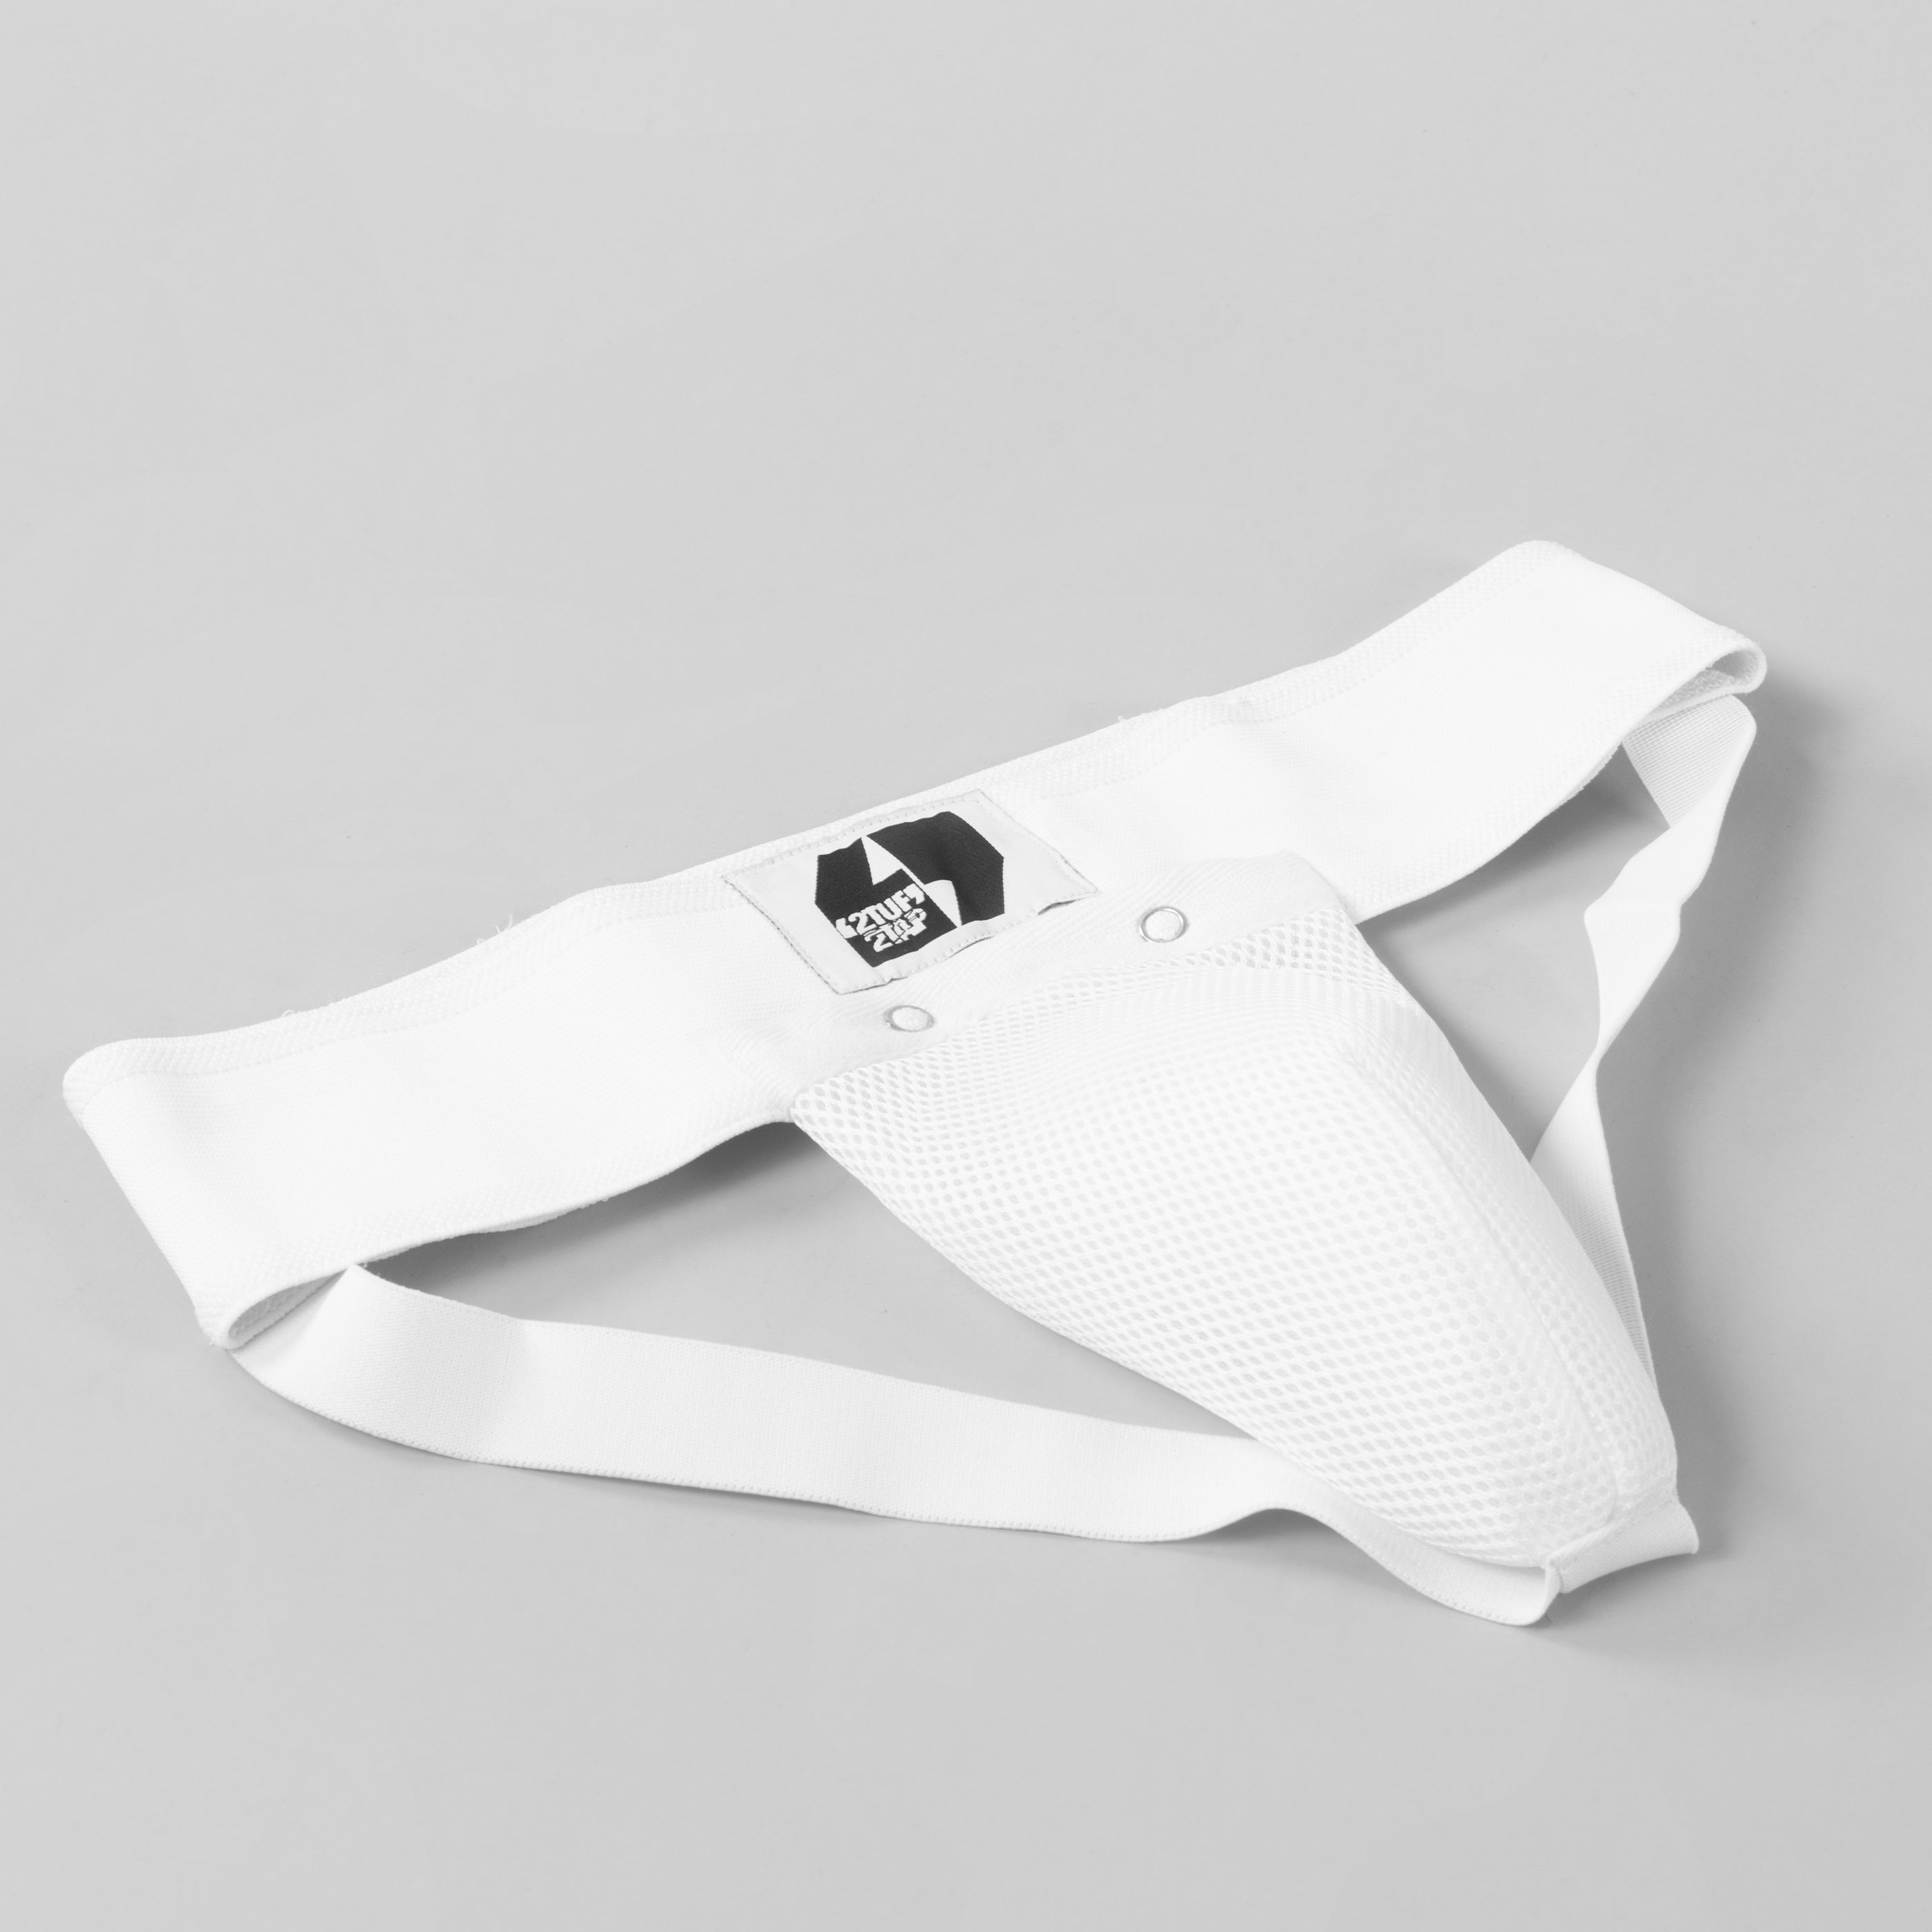 'Light Shell' Cup Groin Guard - White/Black 2TUF2TAP